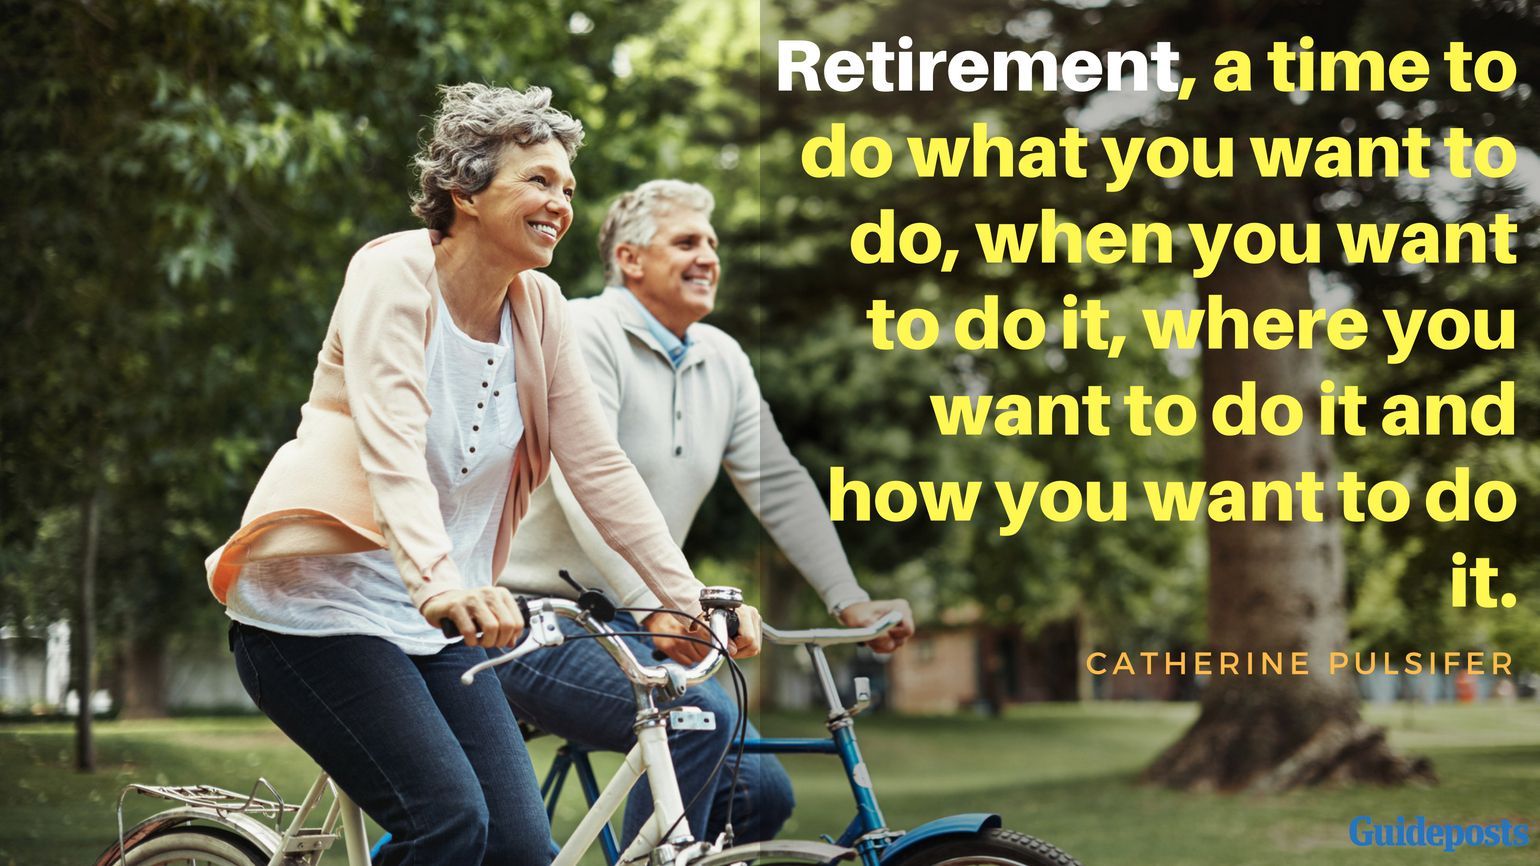 Inspirational Quotes for Retirement:“Retirement, a time to do what you want to do, when you want to do it, where you want to do it and how you want to do it,” – Catherine Pulsifer Better Living Life Advice